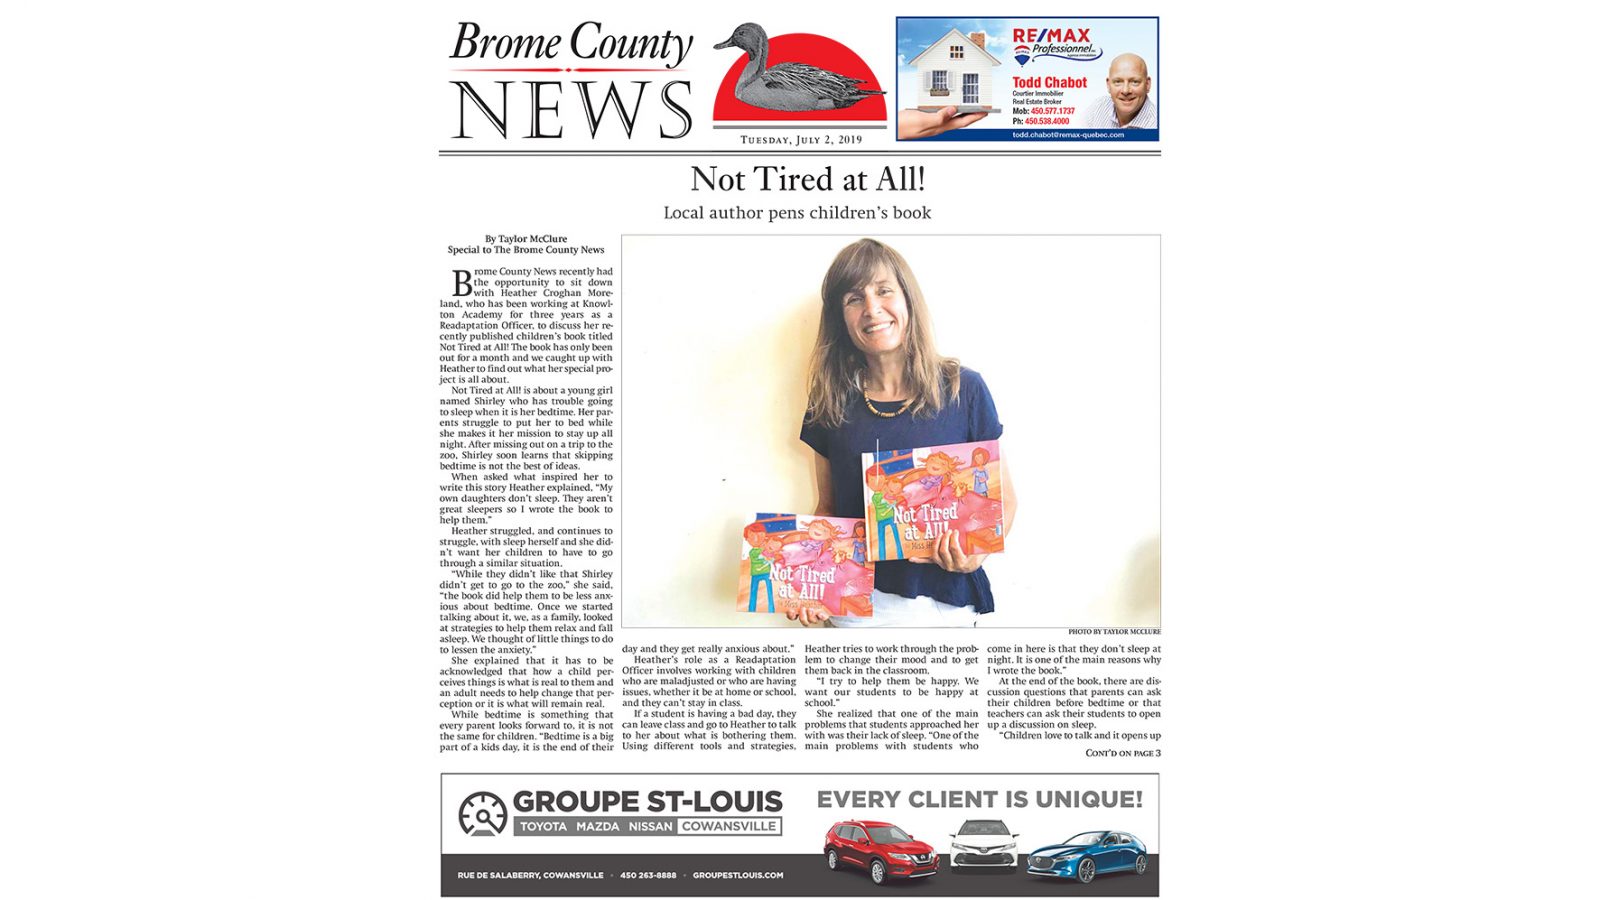 Brome County News – July 2, 2019 edition